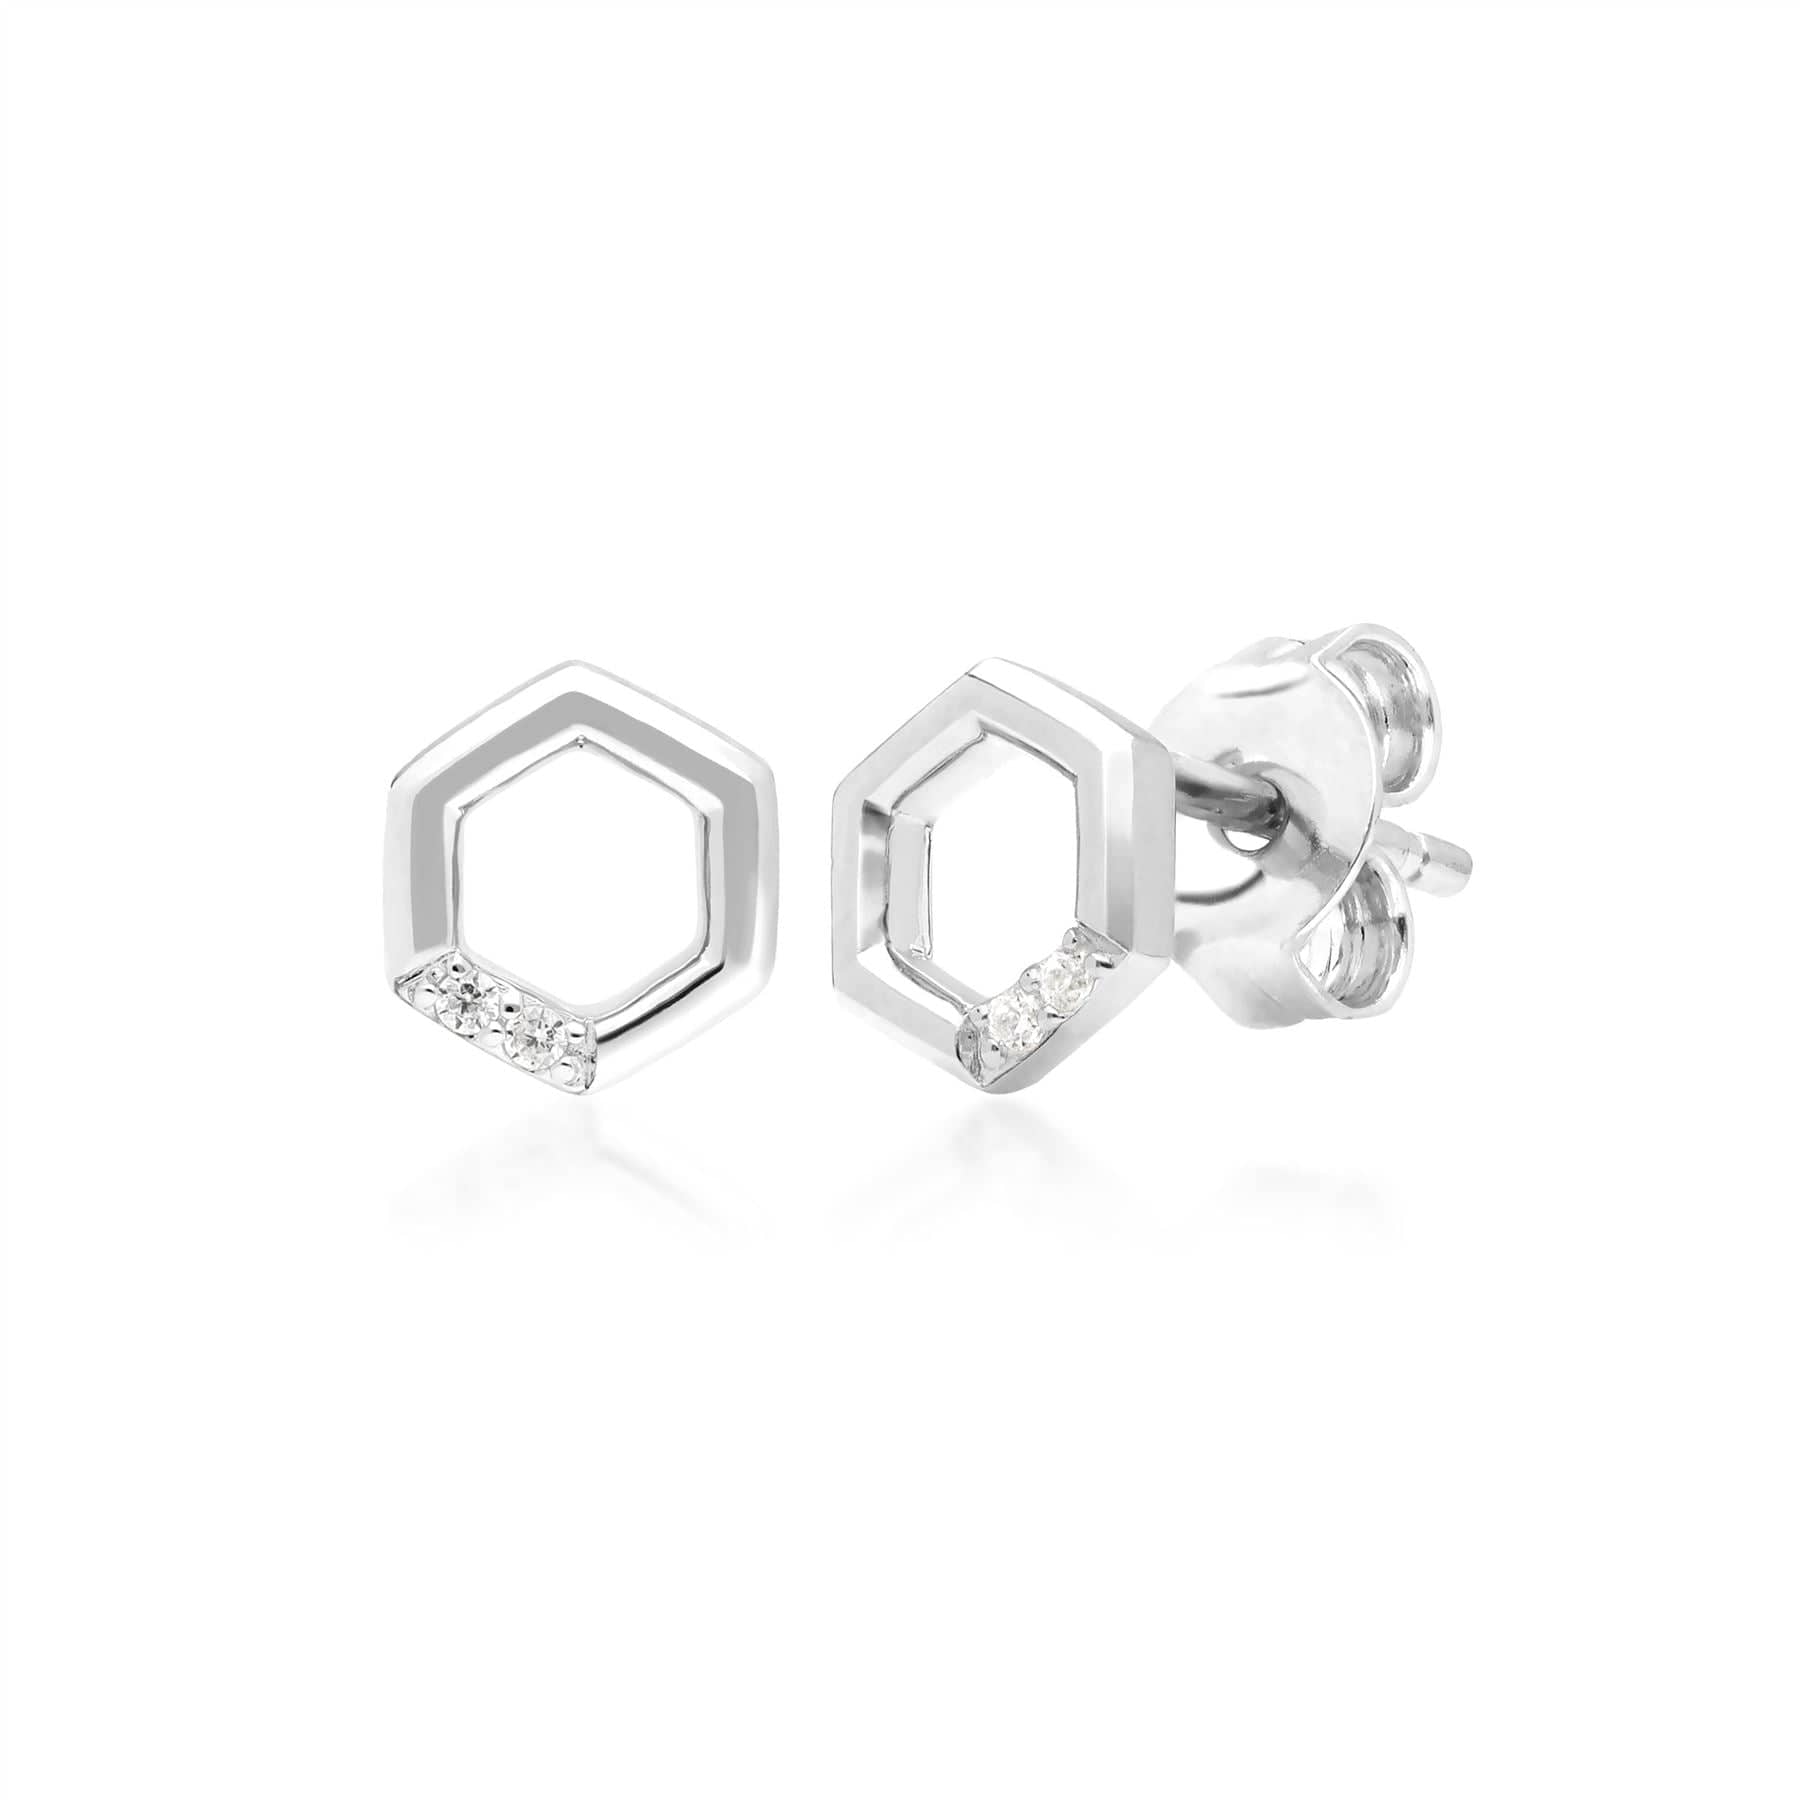 162E0270019 Diamond Pave Hexagon Stud Earrings in 9ct White Gold 1